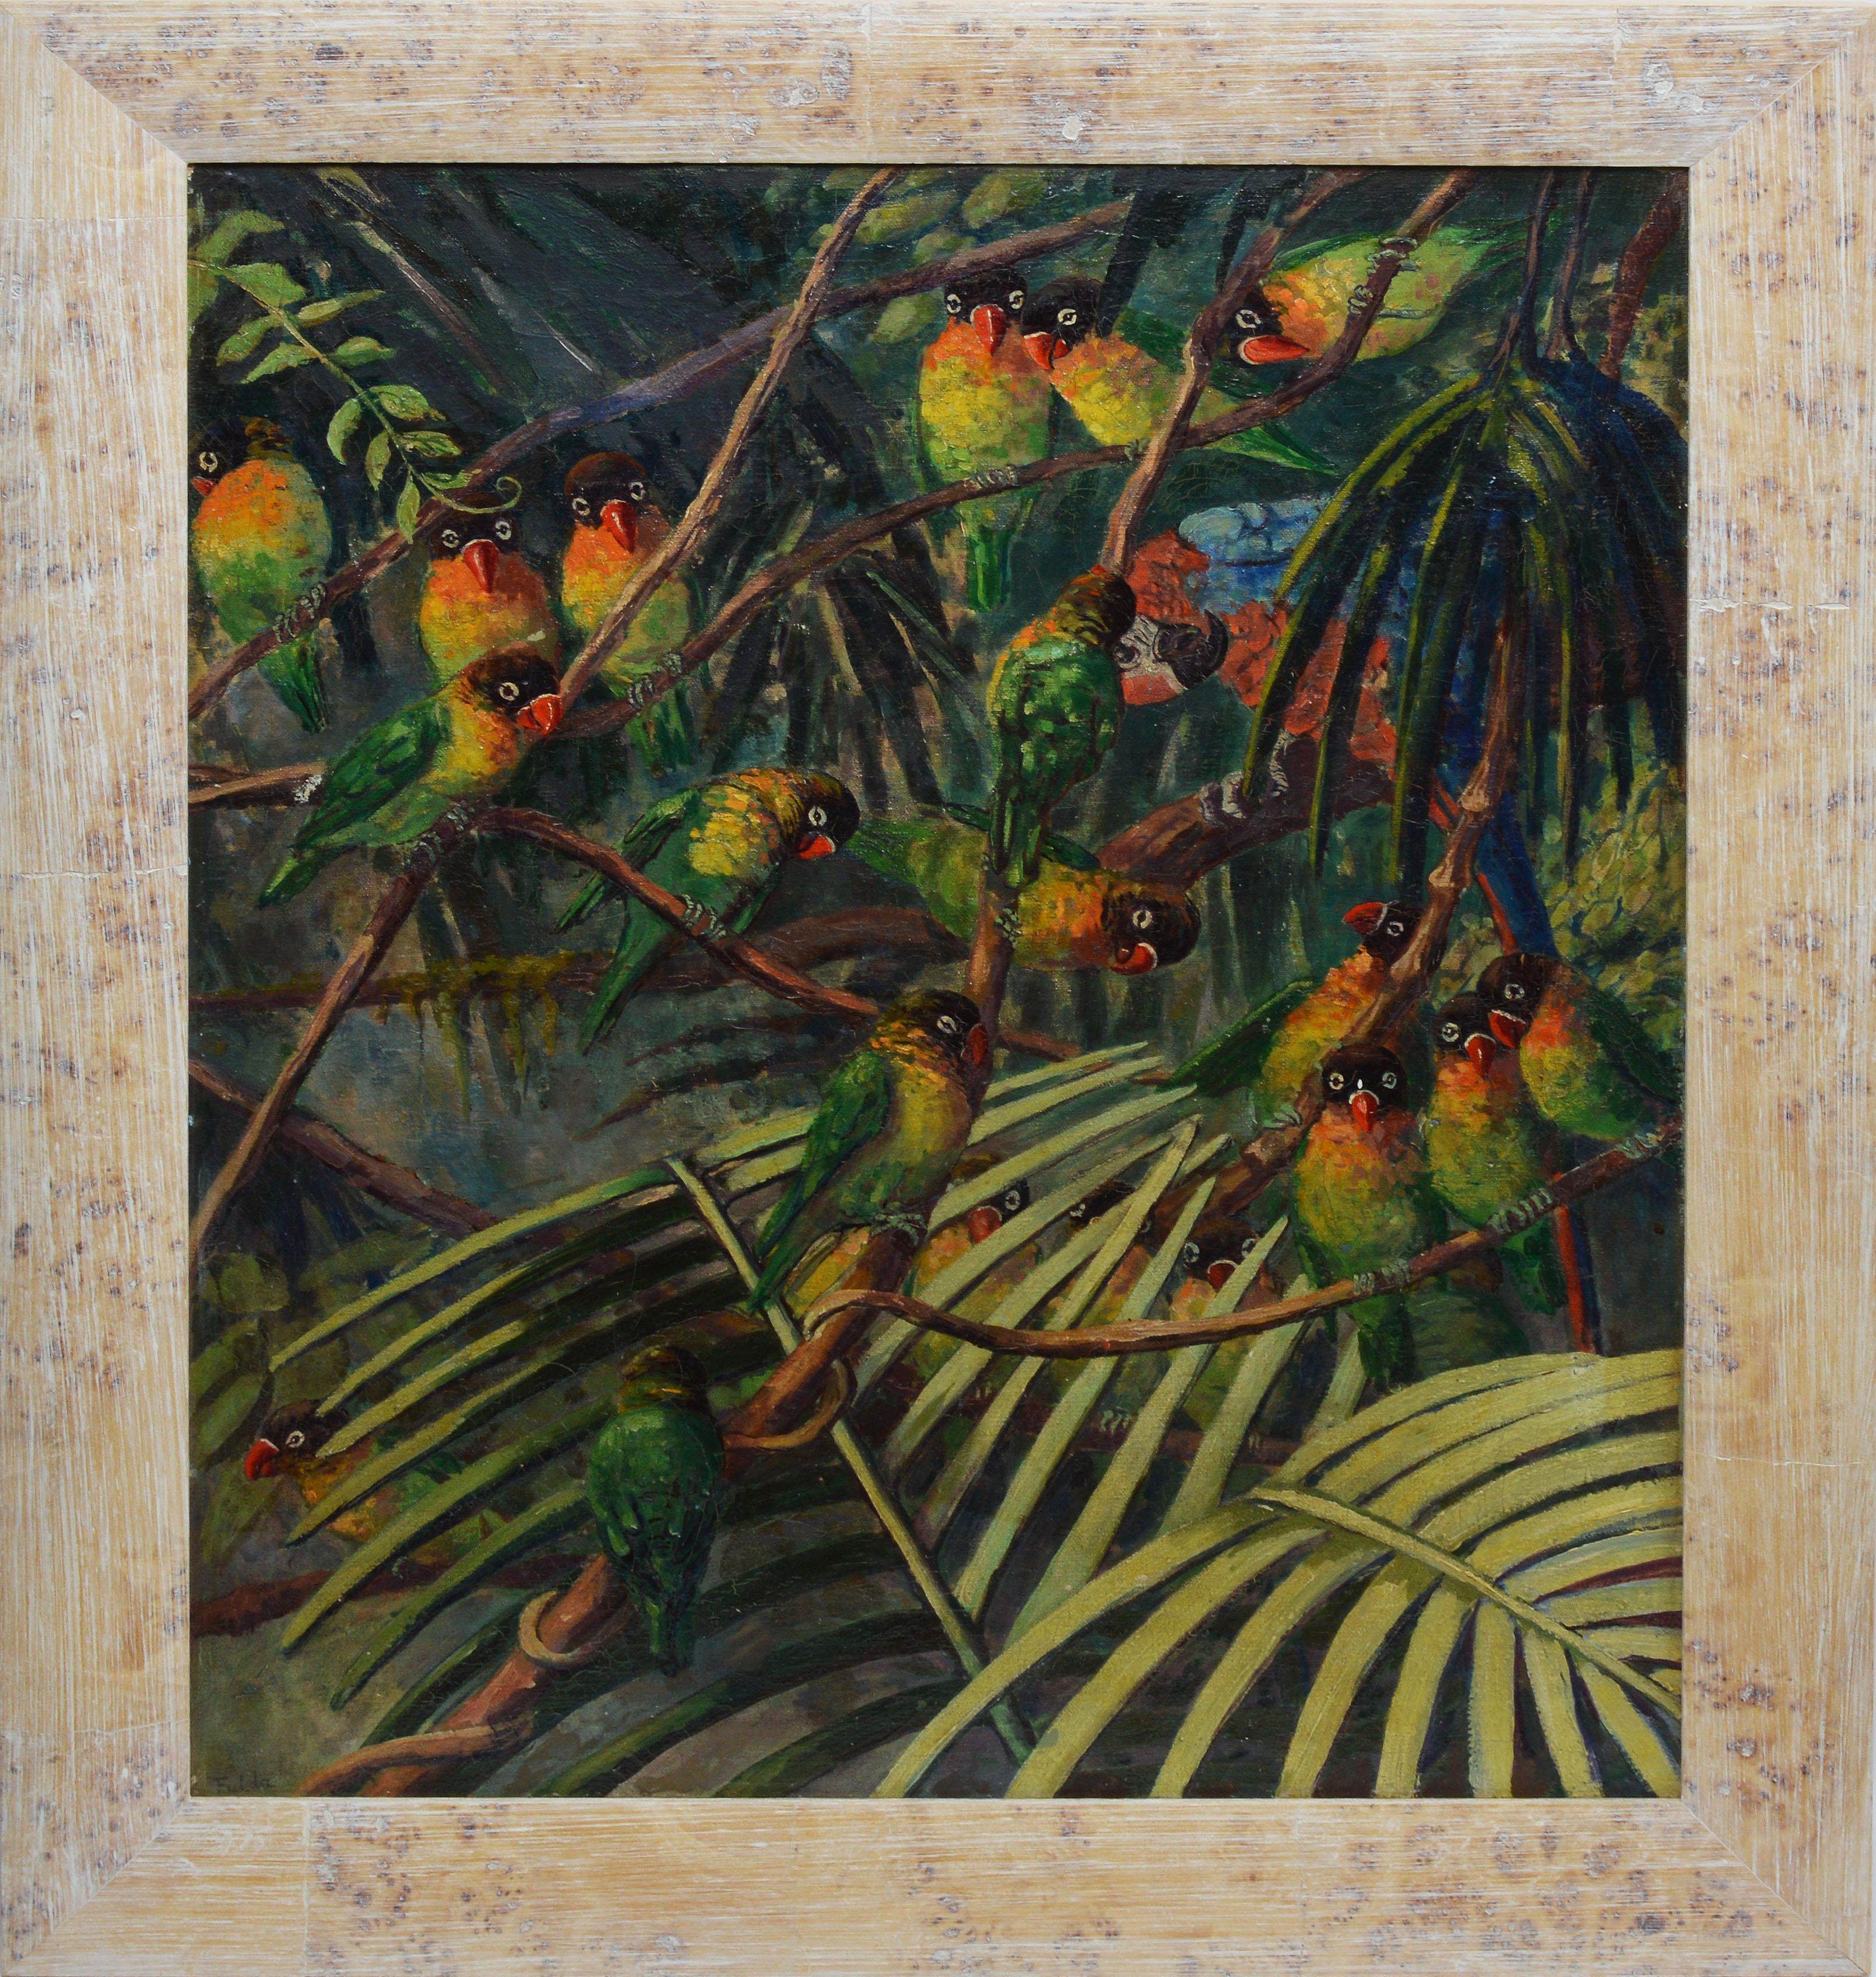 Impressionist view of tropical birds by Elizabeth Fulda  (1879 - 1968).  Oil on canvas, circa 1920.  Signed lower left. Displayed in a white wood impressionist frame.  Image size, 21"L x 26"H, overall 26"L x 31"H.